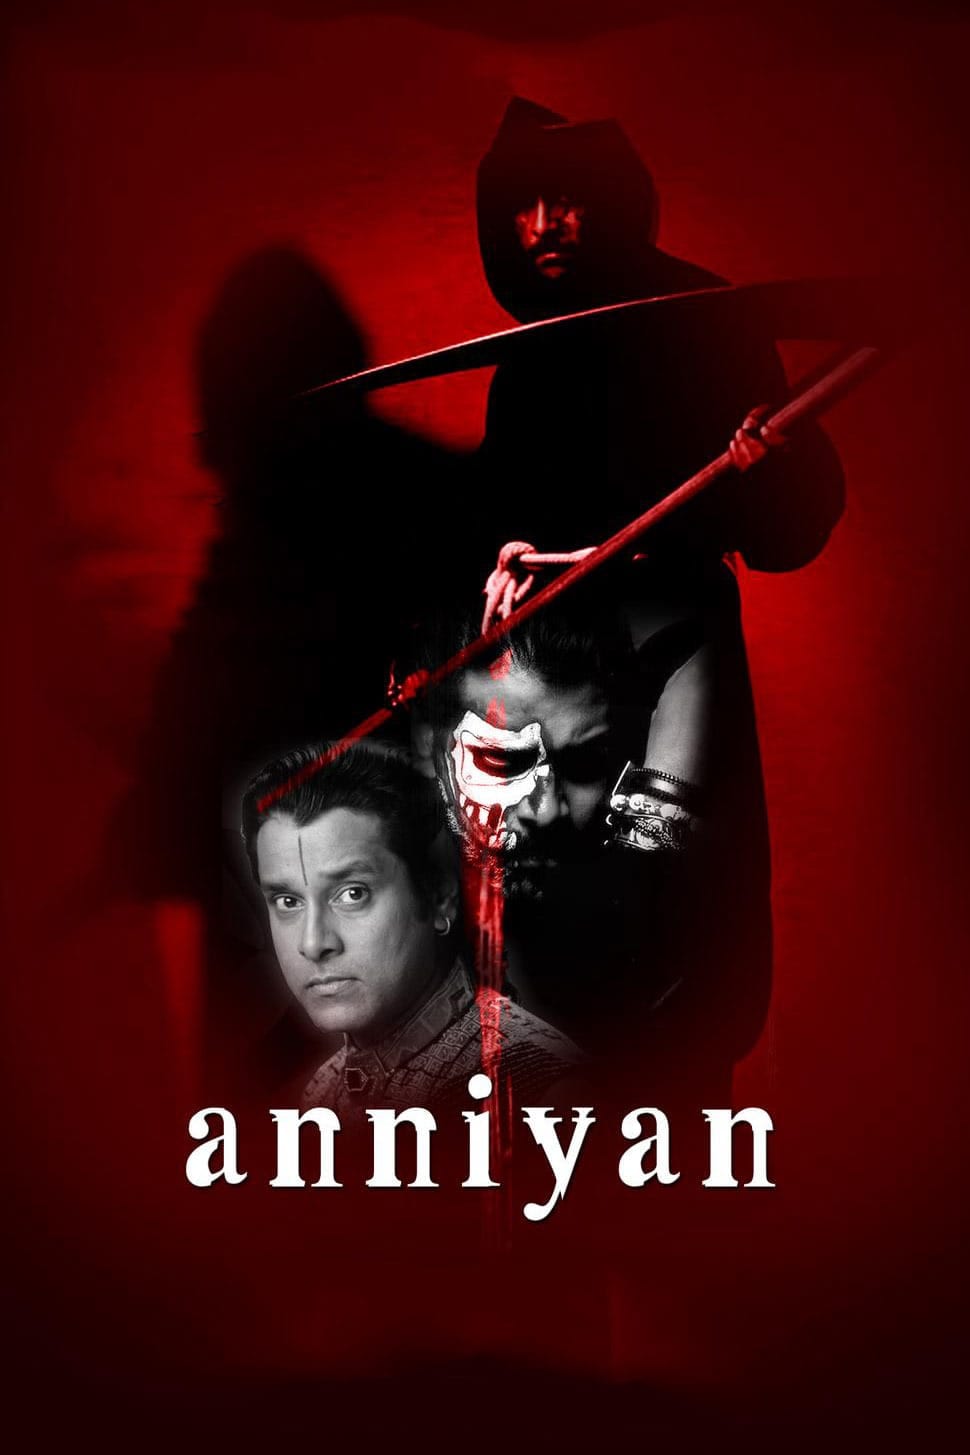 Poster for the movie "Anniyan"